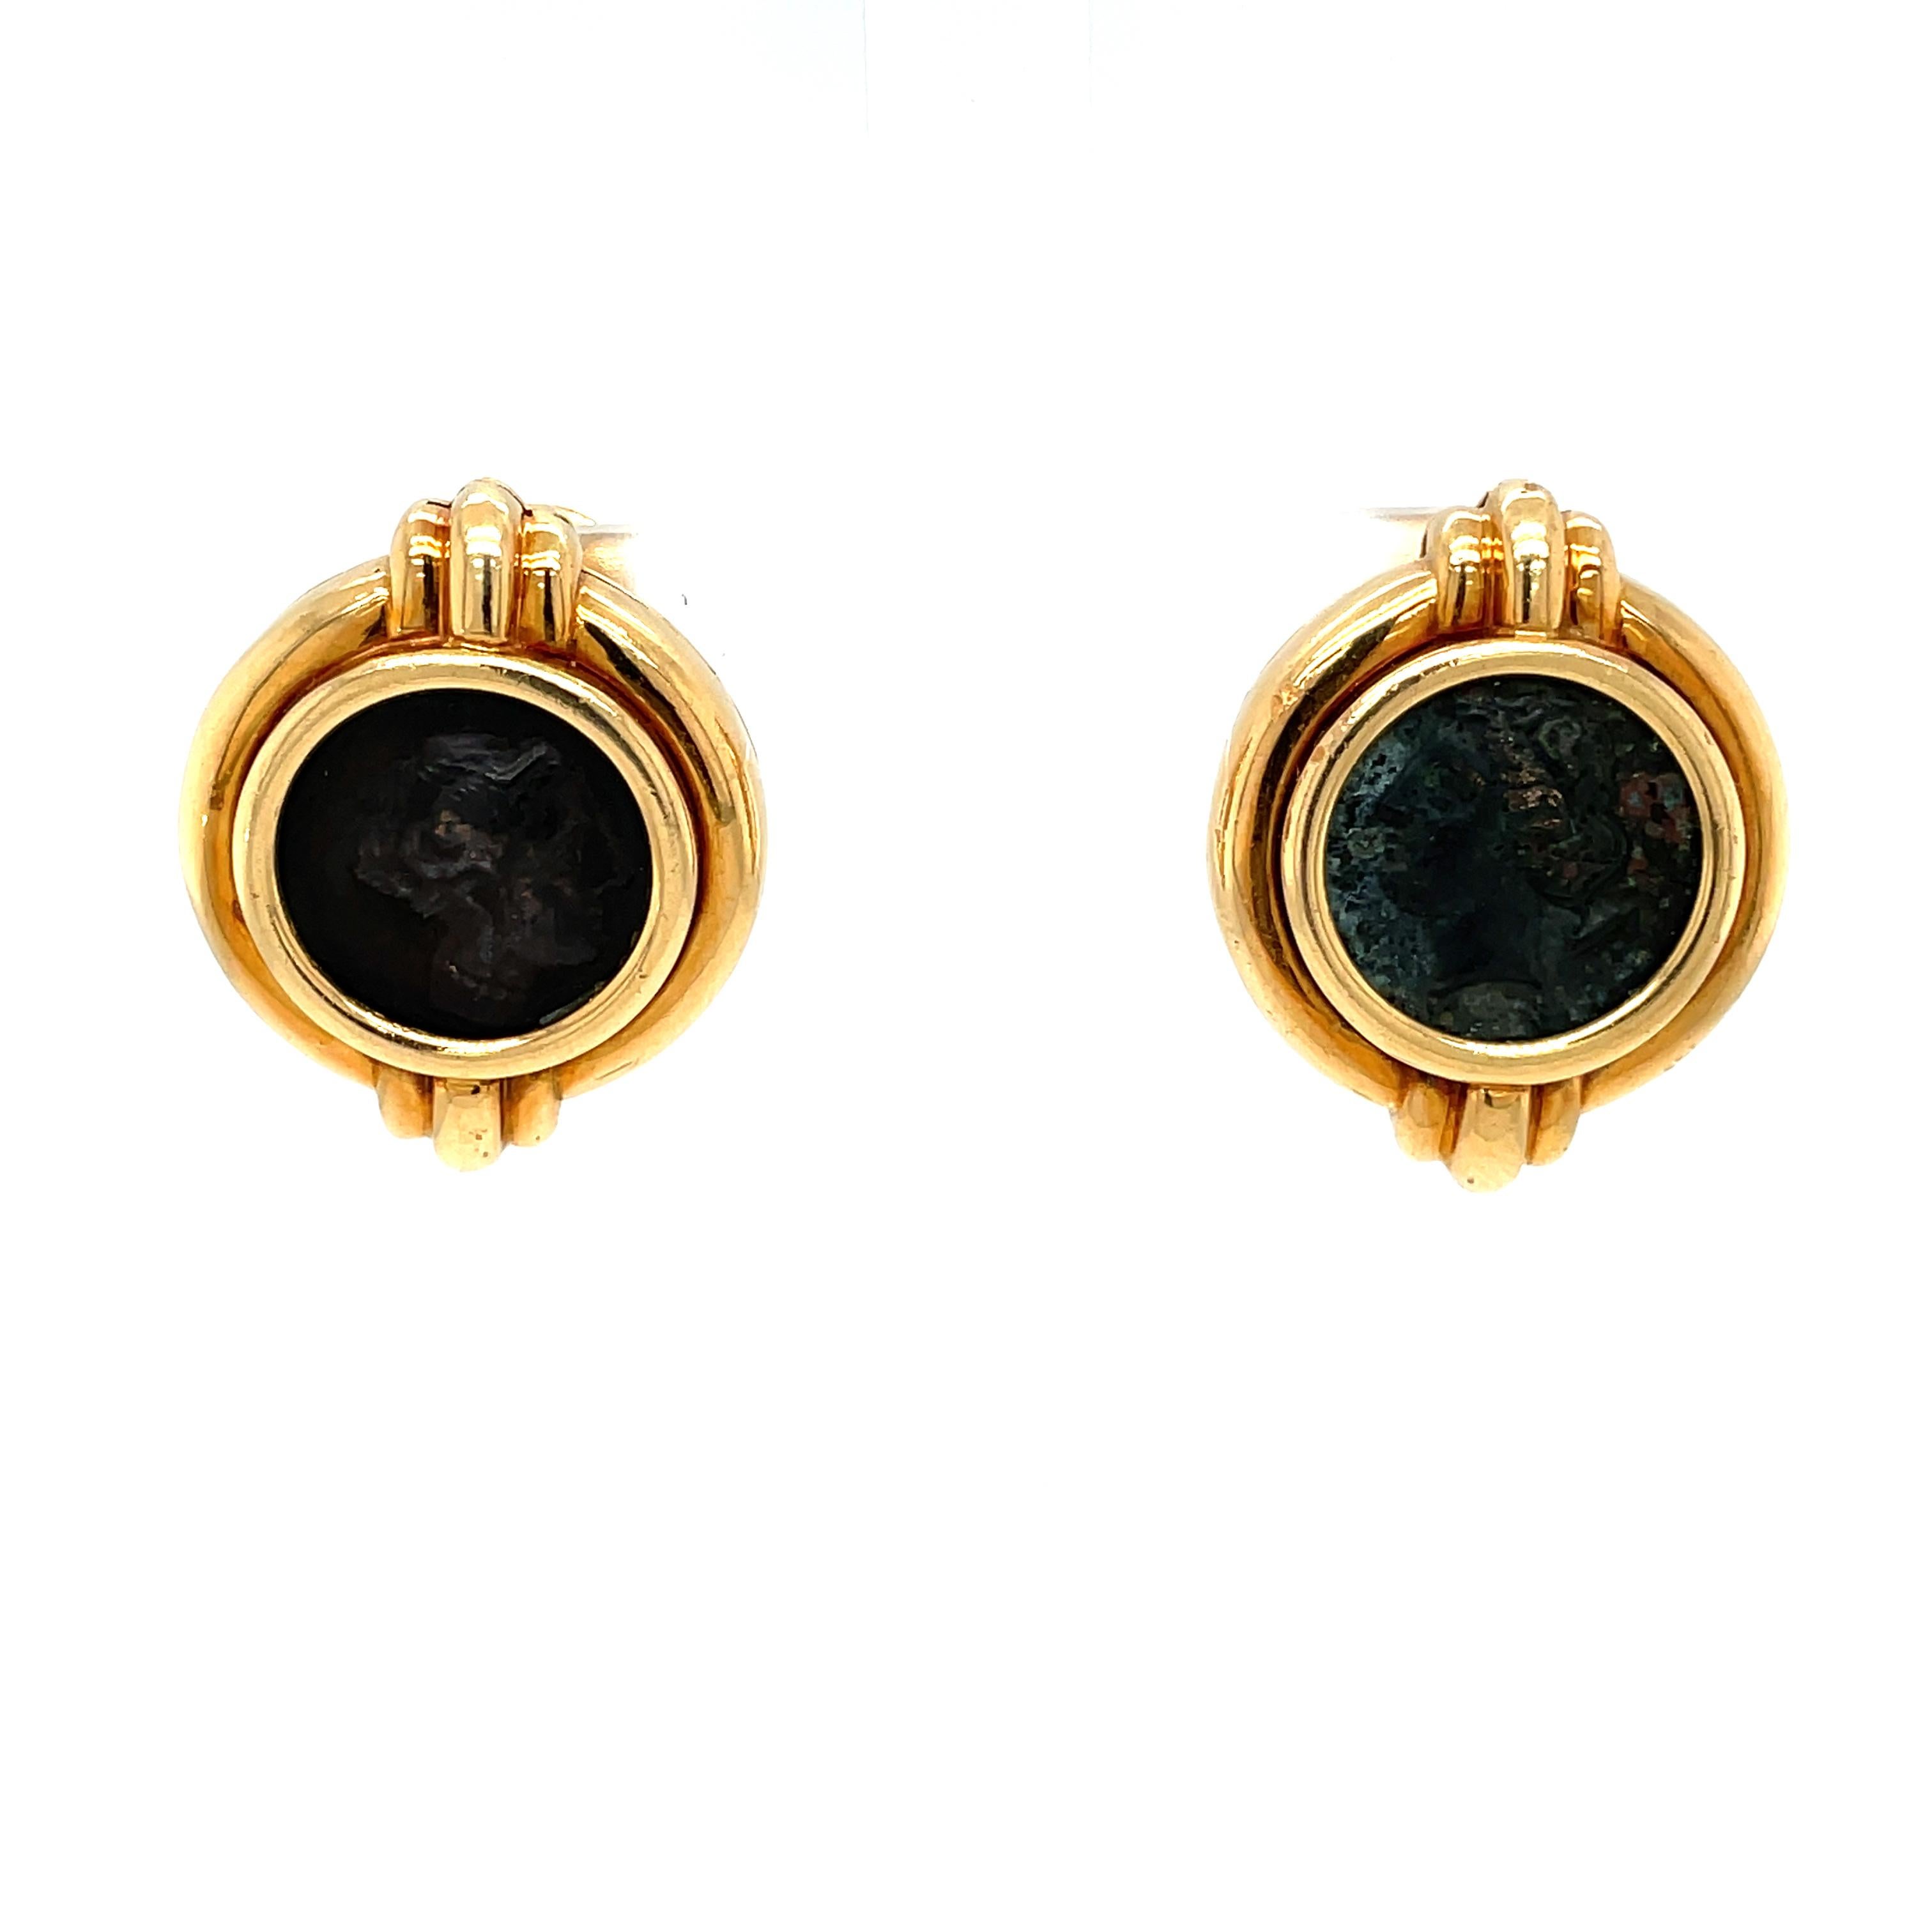 Beautiful 18k yellow gold earrings, crafted by Bulgari for Monete collection, one of the most popular and valuable collection of the famous brand present also in their museum in Rome.

They're set with rare ancient coins in the center:


- Sicilia